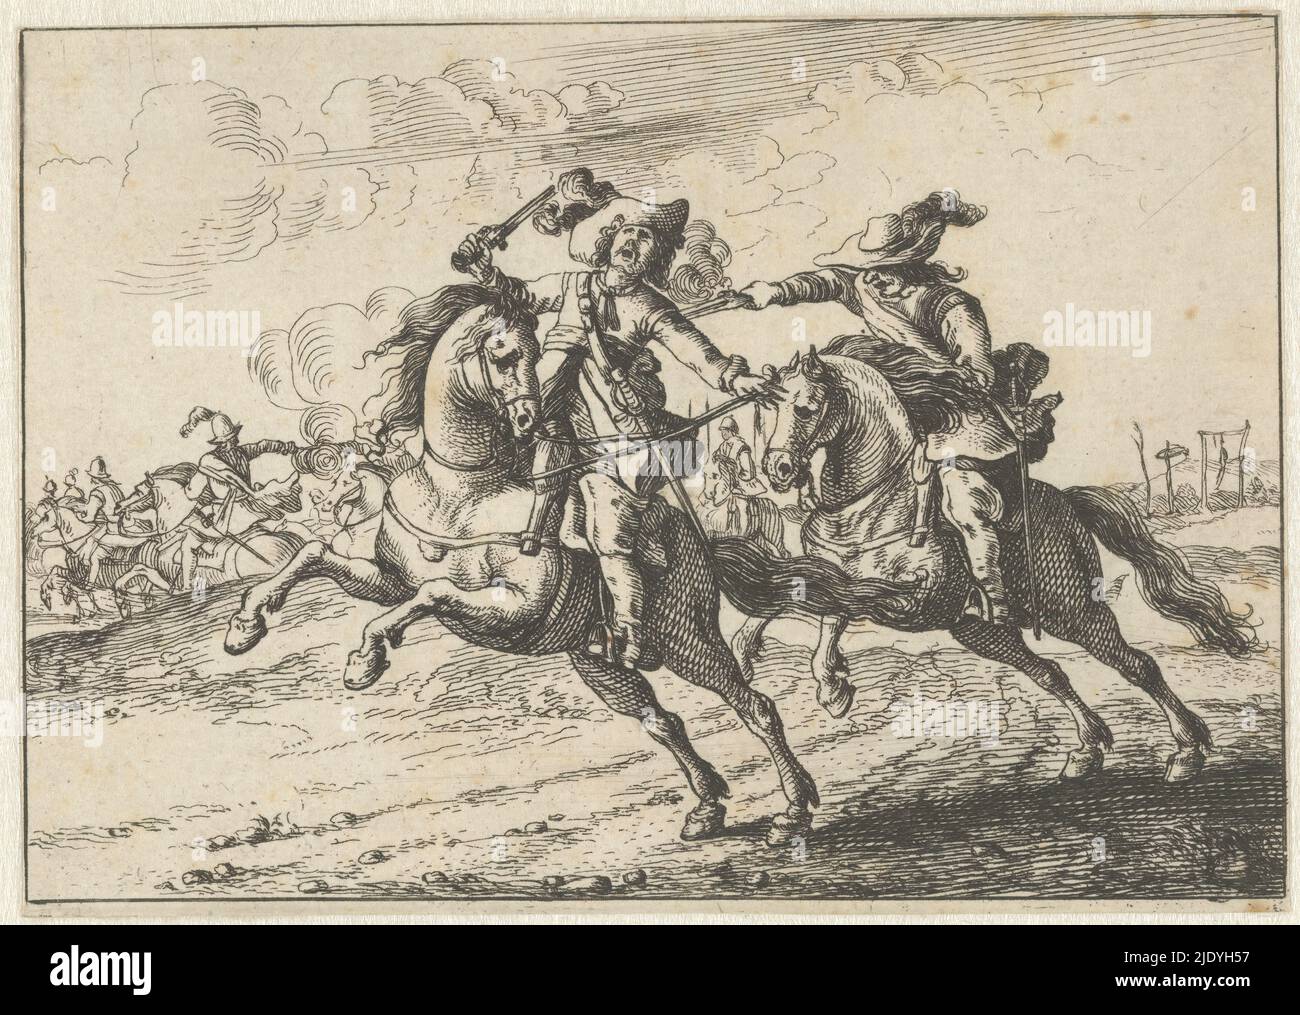 Horsemen's Fight, Batailles et Rencontres (series title on object), Fight between horsemen with pistols. Part of a series of six prints on the army of the governor Leopold William, Archduke of Austria., print maker: Theodorus van Kessel, after own design by: Theodorus van Kessel, Antwerp, 1654, paper, etching, height 94 mm × width 135 mm Stock Photo